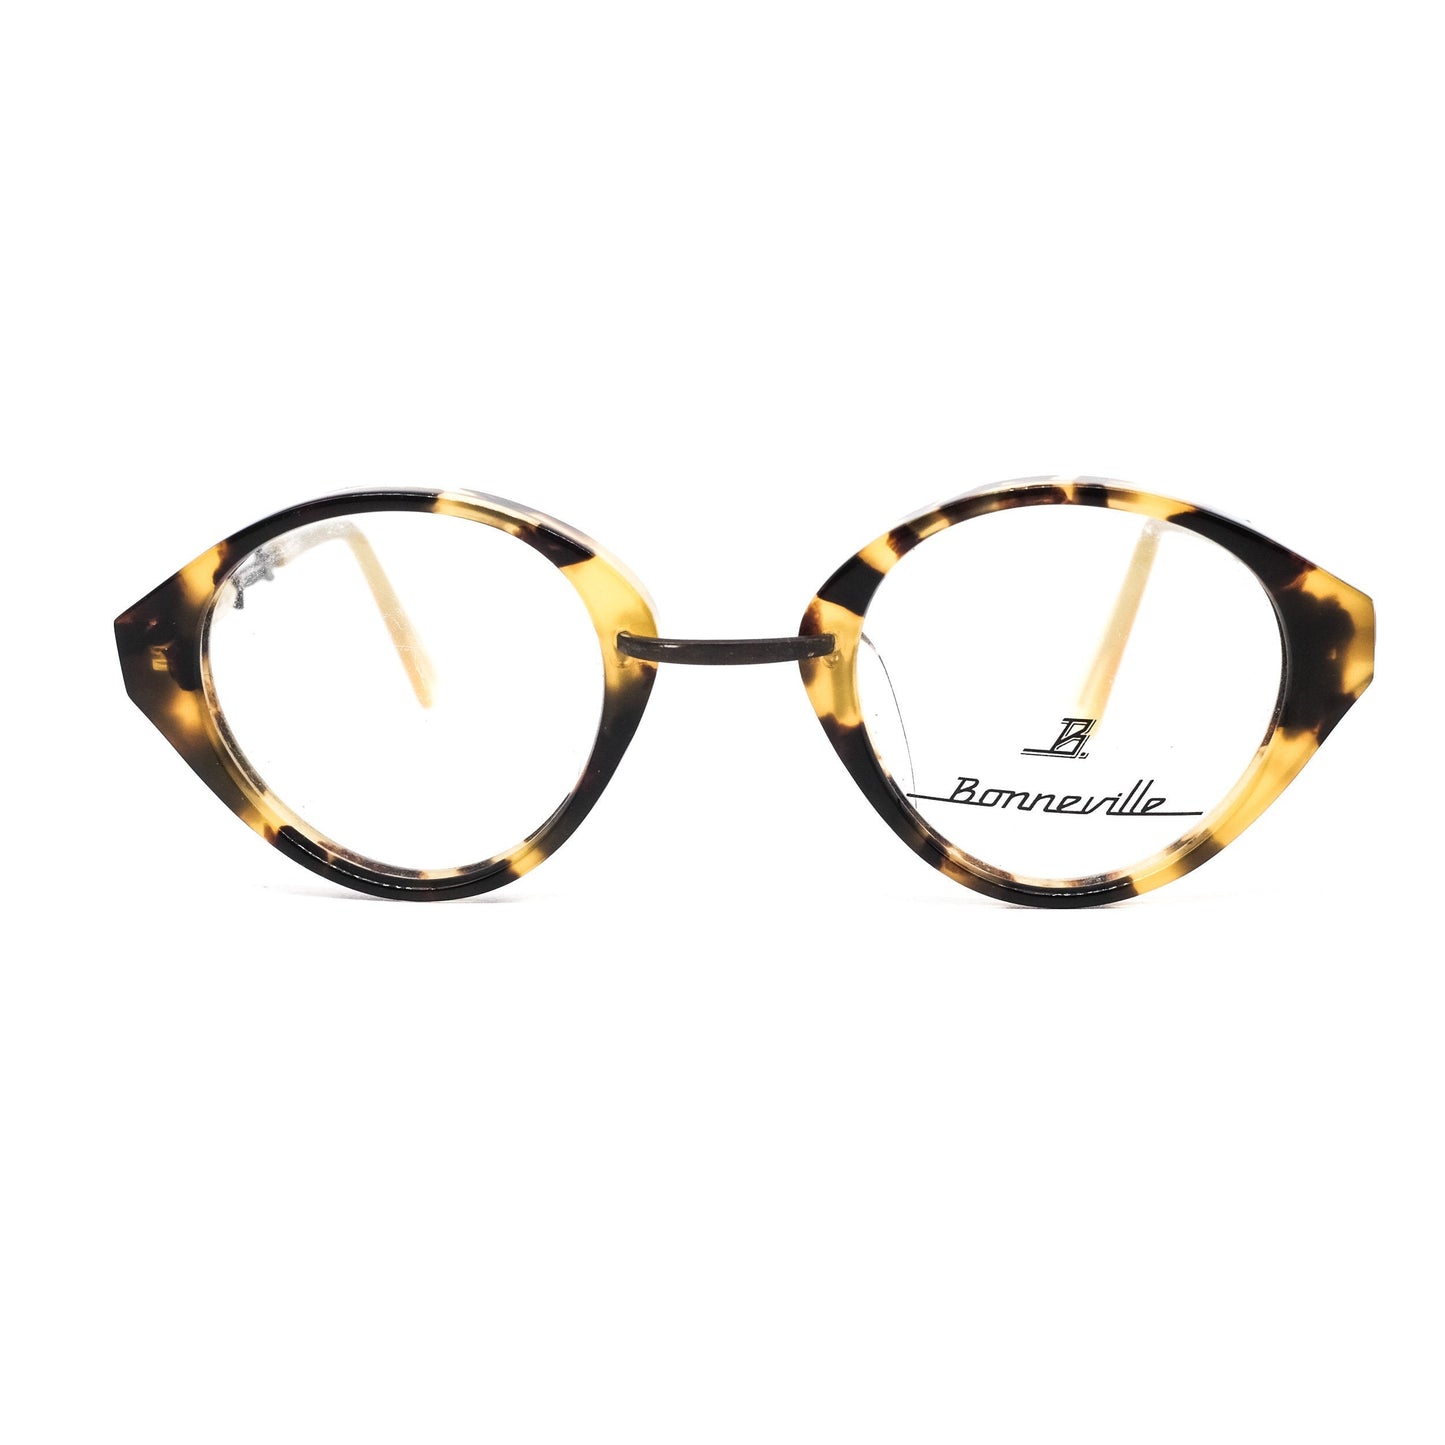 Bonneville vintage brown tortoise round cello eyeglasses frames Made in Germany with special temples design, NOS 1990s